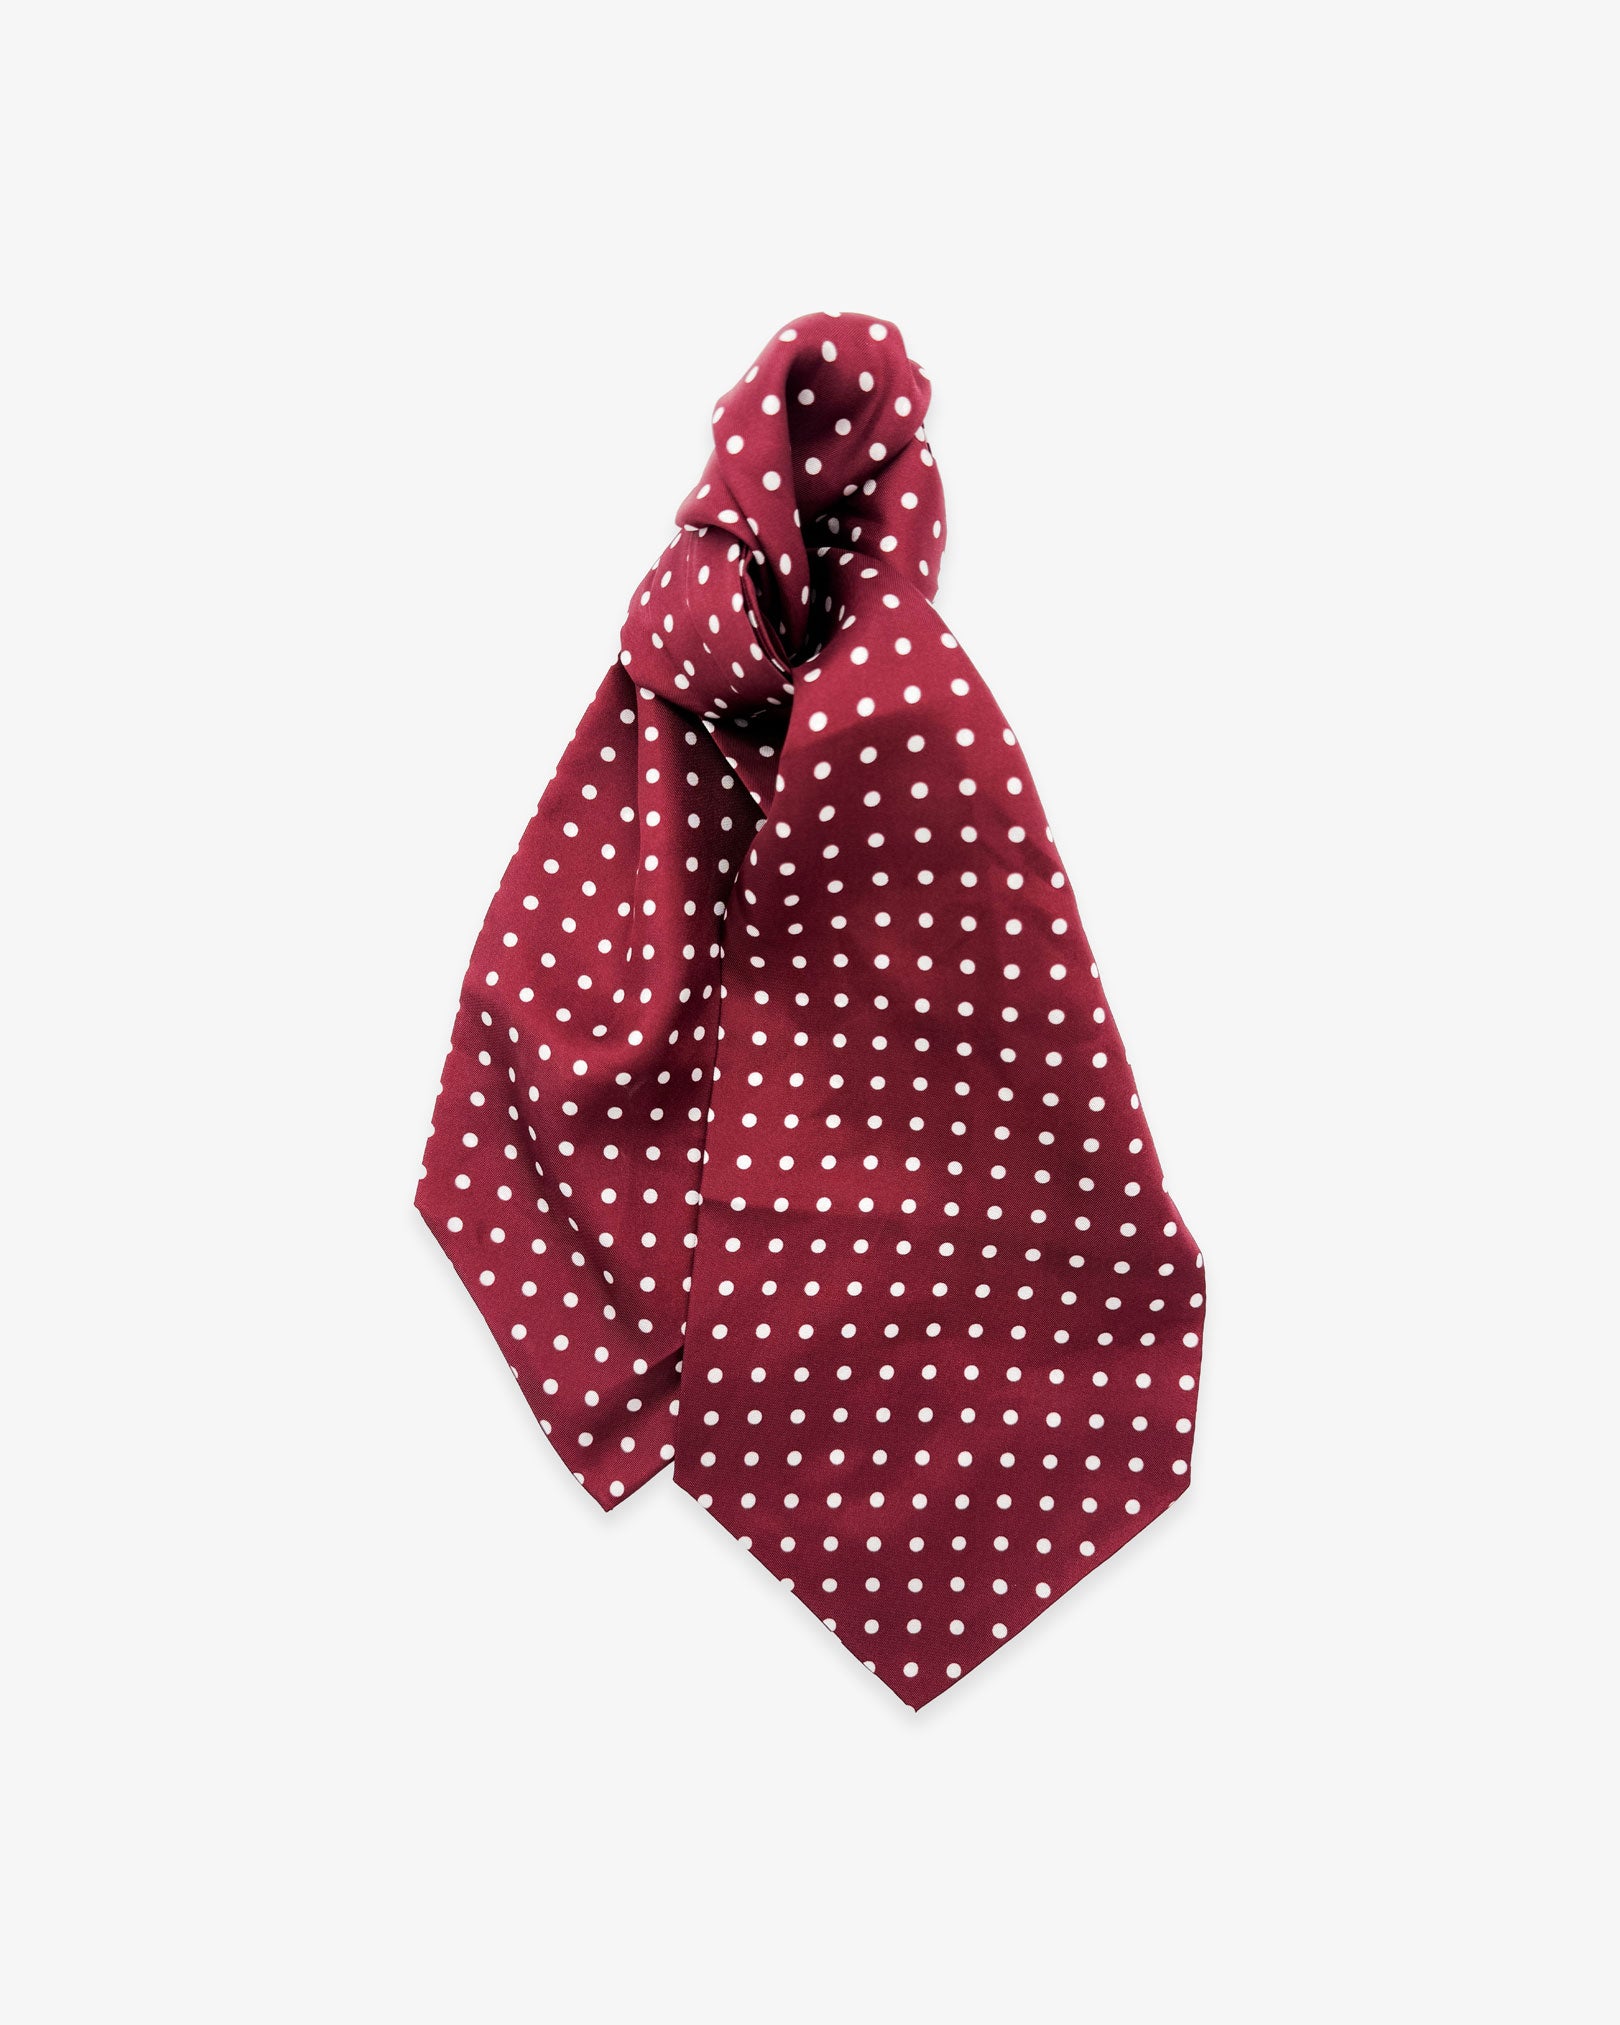 Entire view of 'The Sapporo' double Ascot tie with wide ends at the bottom and clear view of the white polka dots on a maroon background.